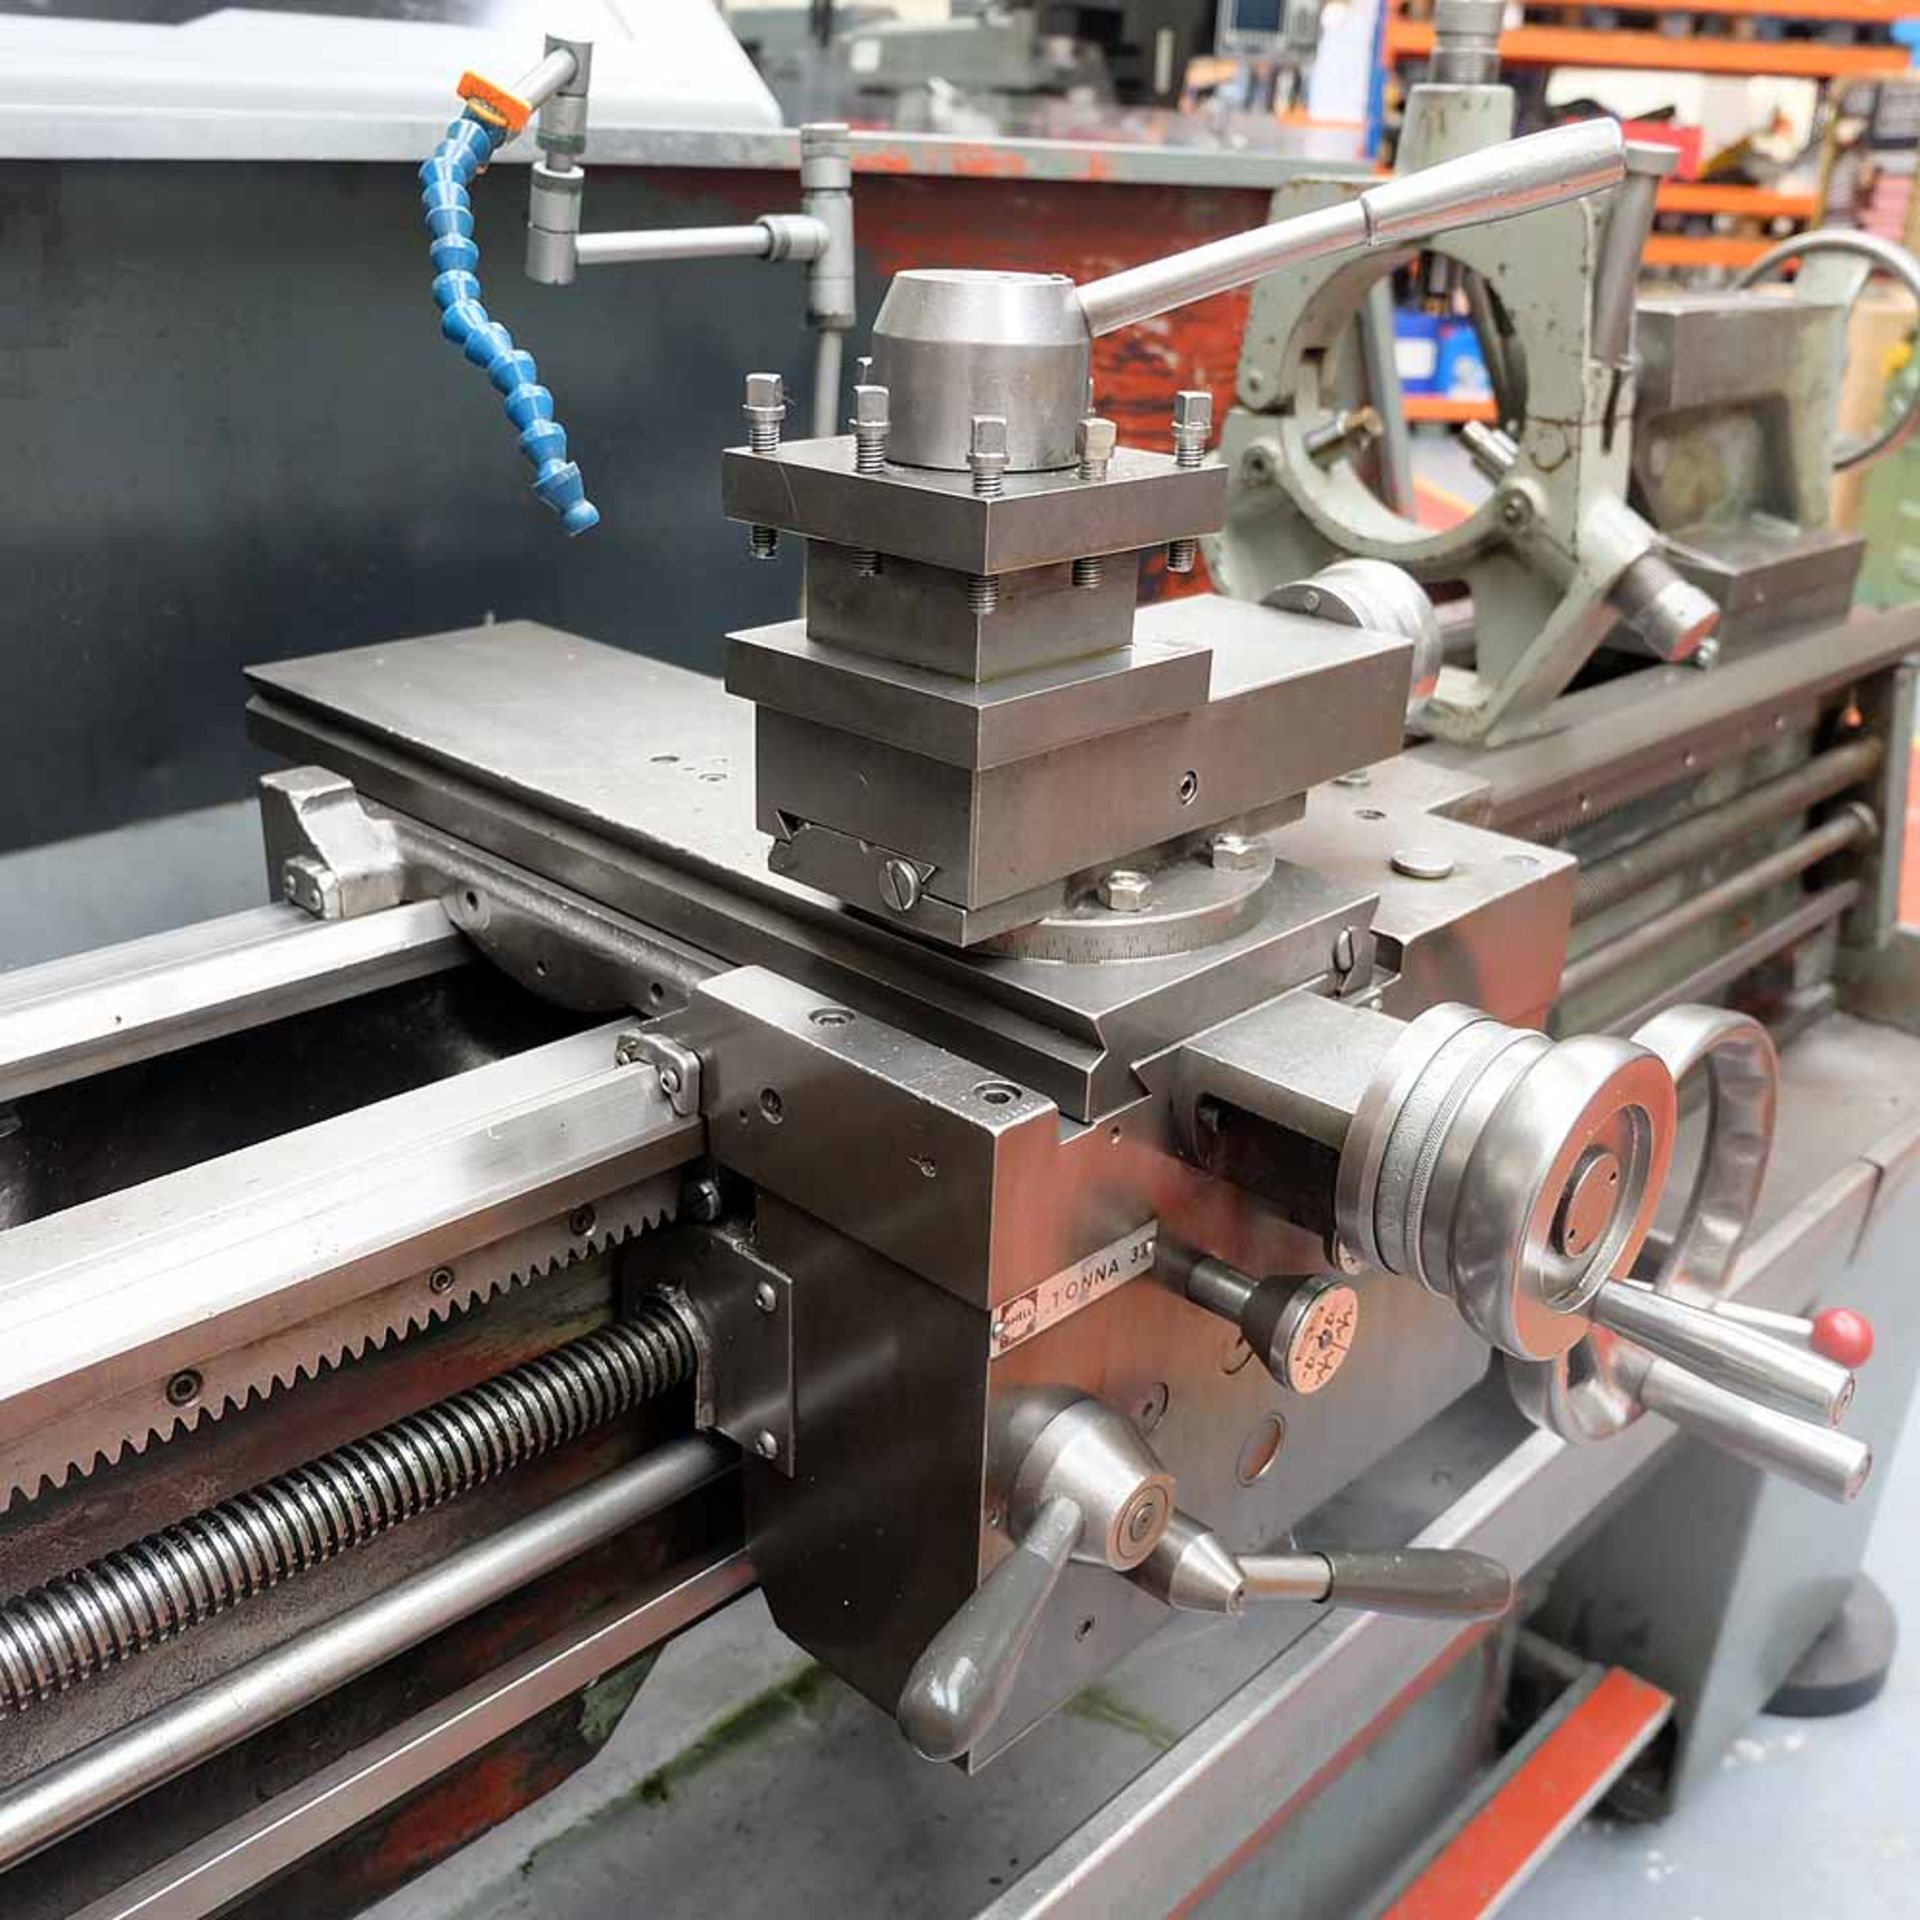 Colchester Triumph 2000 Gap Bed Centre Lathe. Capacity 15" Diameter x 50" Between Centres. - Image 6 of 10